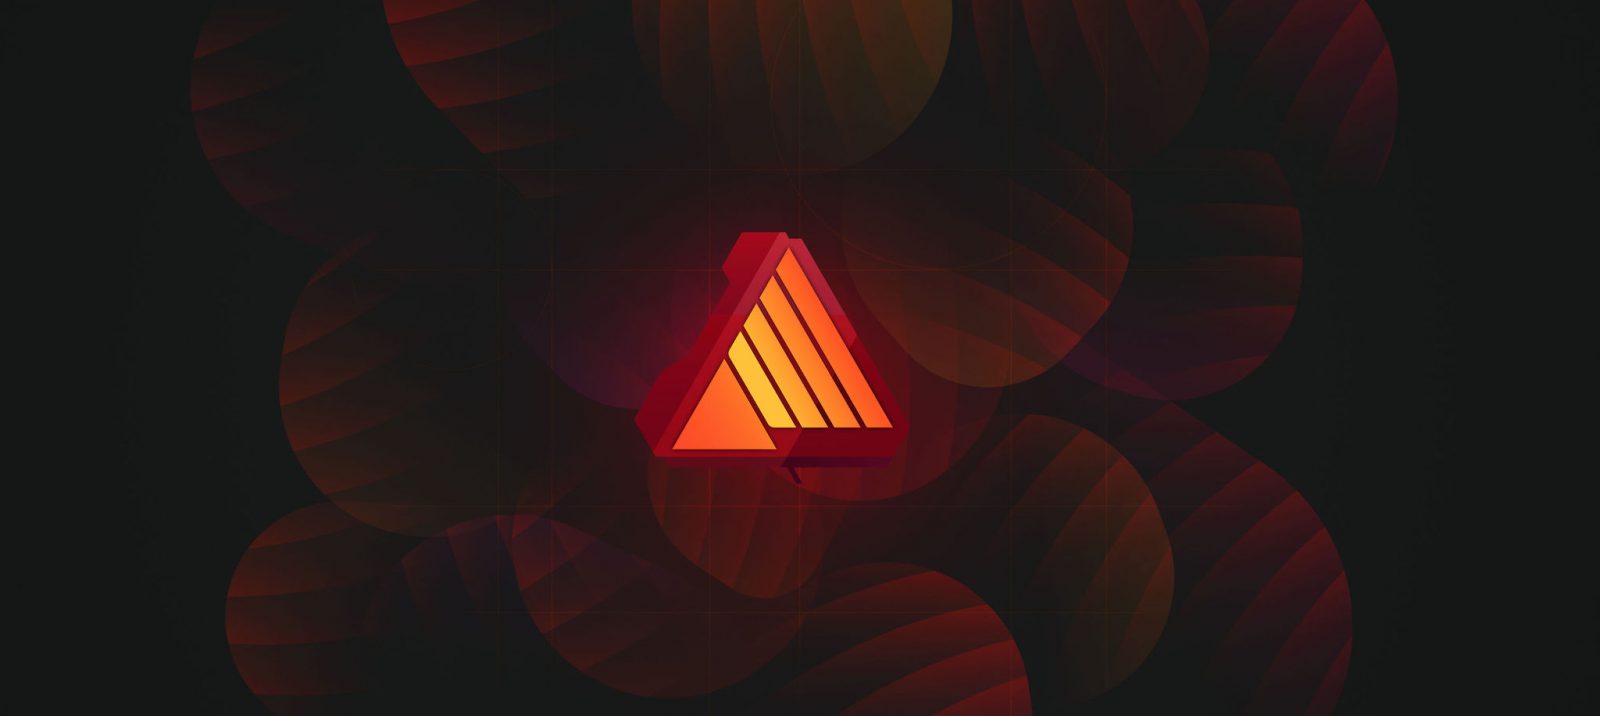 Affinity Publisher first review: a star is born